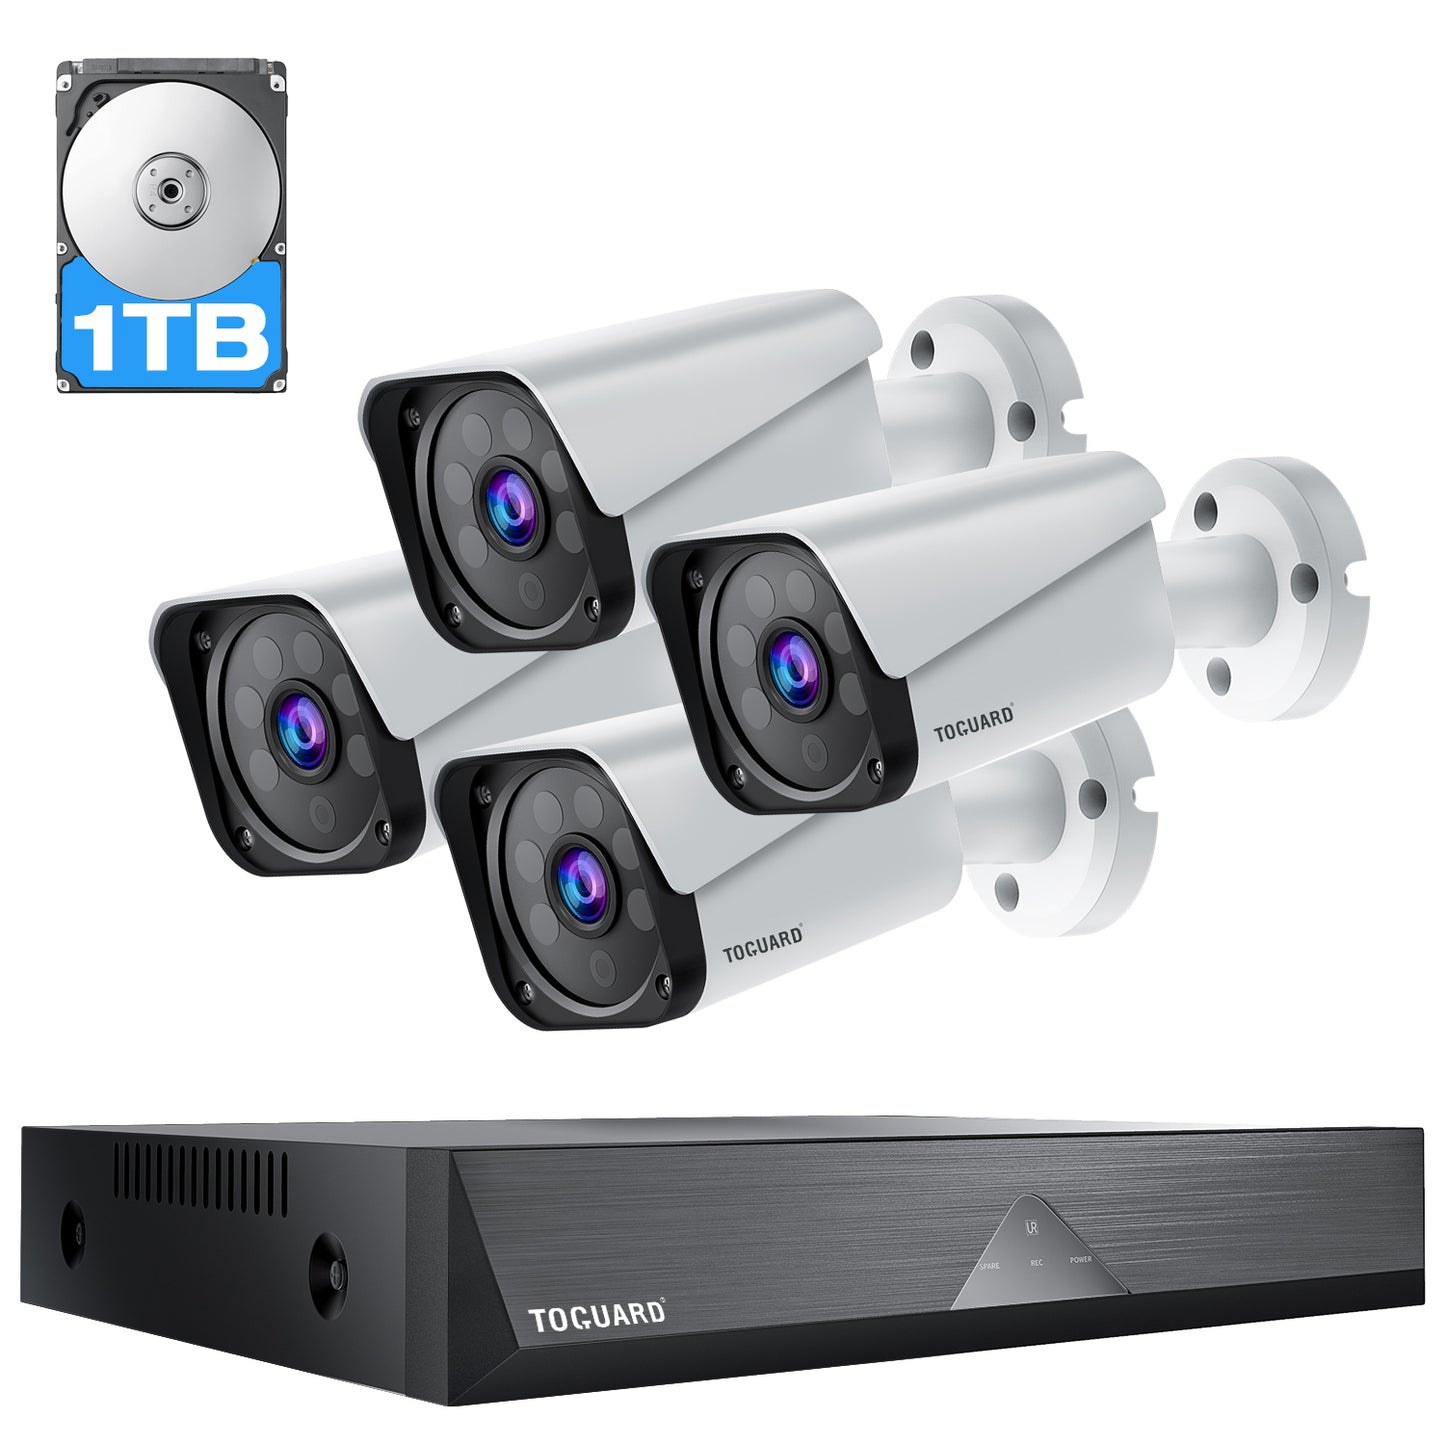 TOGUARD CCTV Security Camera System 1080P Stable Wired Camera Security System 8CH DVR Home Surveillance Cameras IP66 Waterproof (Included 1TB HD)